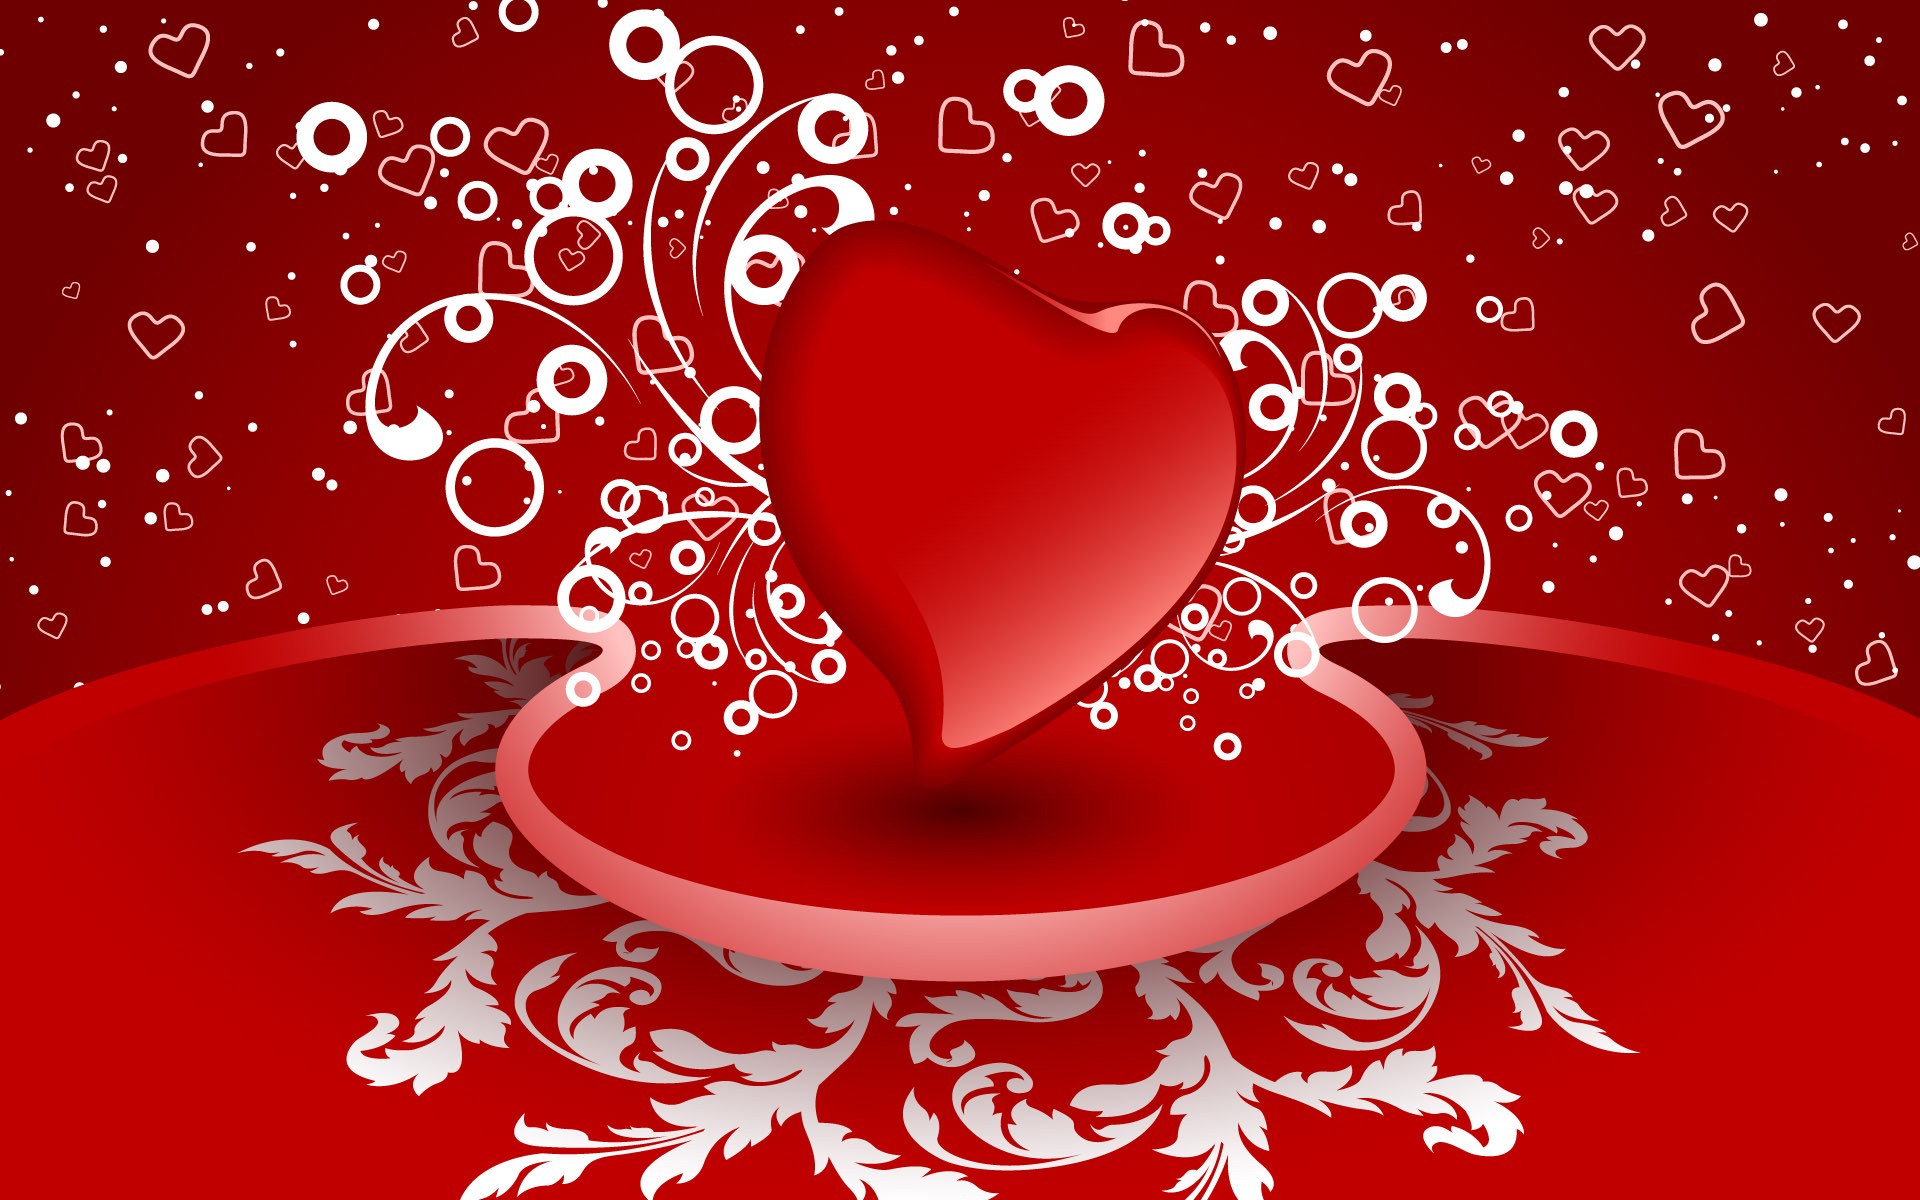 Valentine's Day Love Theme Wallpapers (2) #8 - 1920x1200